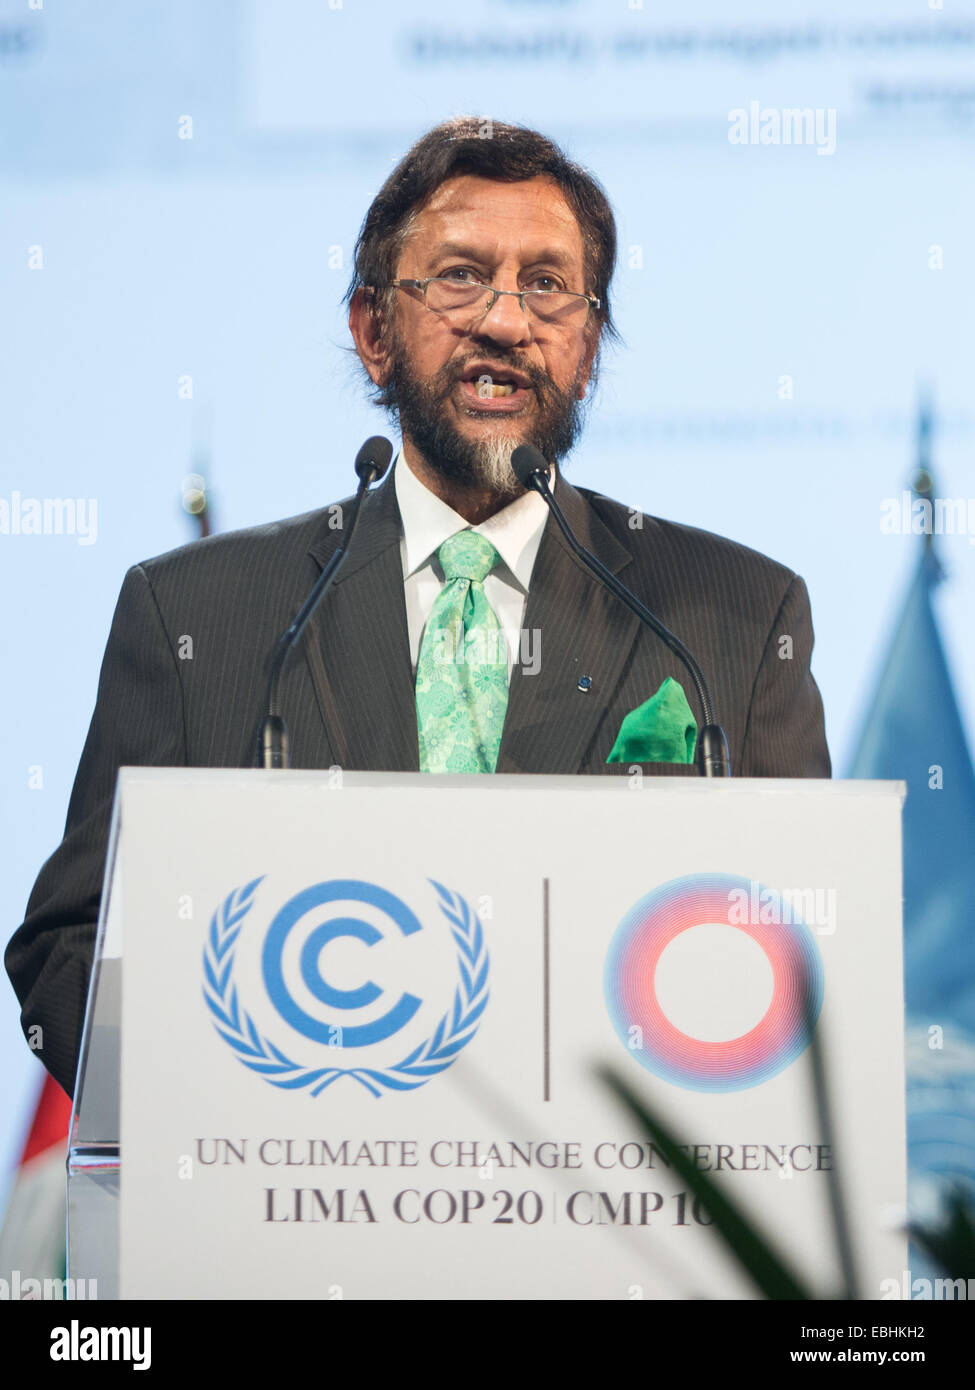 Lima, Peru. 1st Dec, 2014. Rajendra Kumar Pachauri, chairman of the Intergovernmental Panel on Climate Change addresses the opening meeting of the plenary session of the 20th Conference of the Parties (COP 20) of the United Nations Framework Convention on Climate Change (UNFCCC) in Lima, capital of Peru, Dec. 1, 2014. The annual UN global climate change talks started in the Peruvian capital of Lima on Monday amid hopes for hammering out a new international climate deal ahead of key talks in Paris in 2015, but this year's talks were expected to be intense. Credit:  Xu Zijian/Xinhua/Alamy Live N Stock Photo